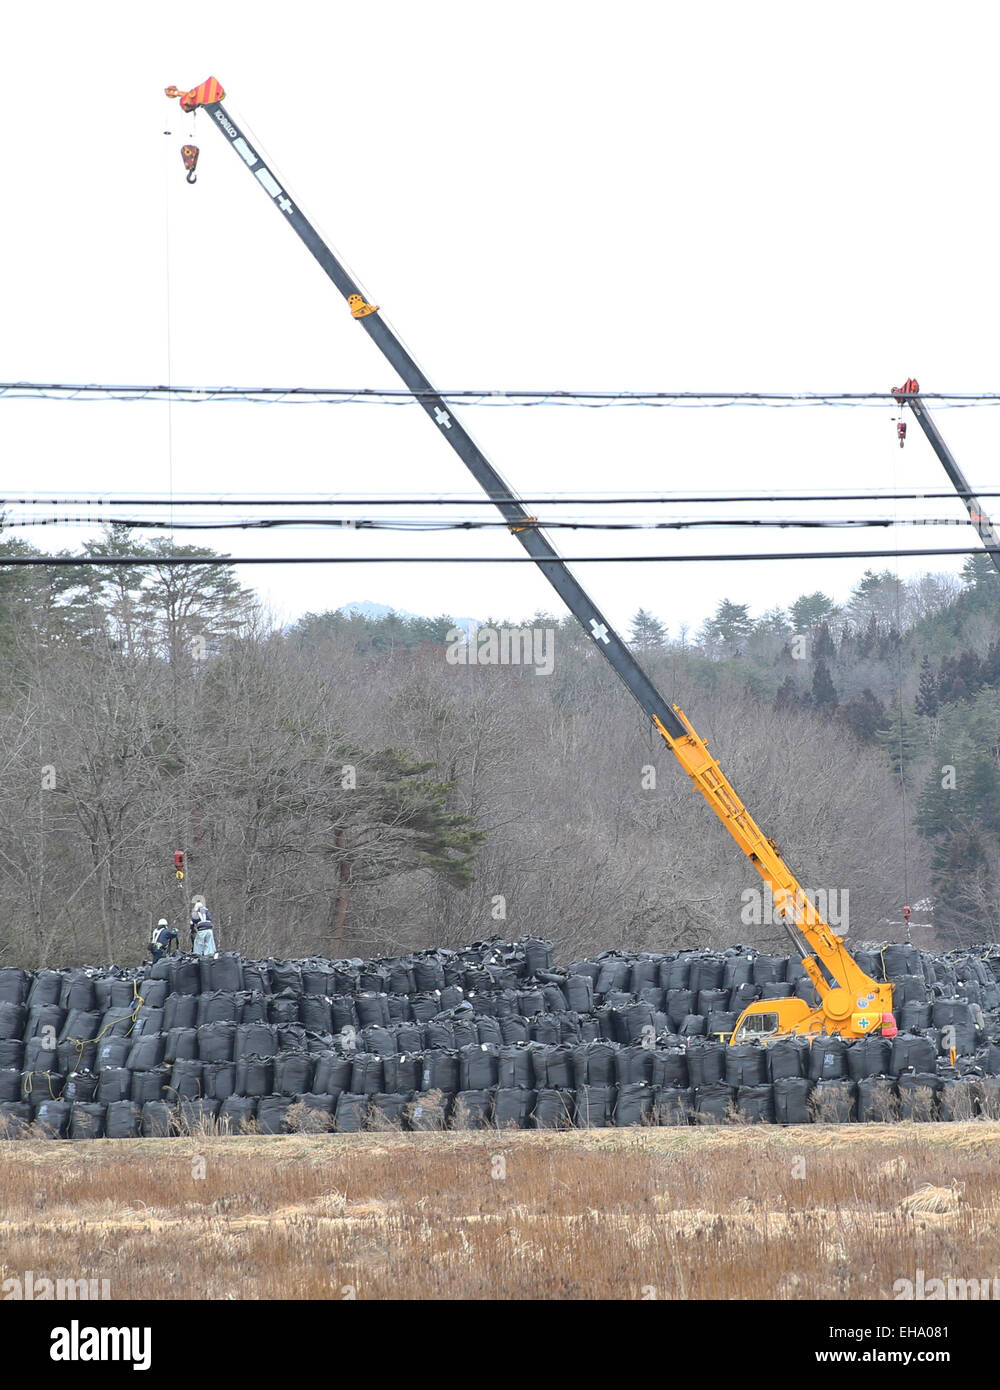 (150310) -- FUKUSHIMA, March 10, 2015 (Xinhua) -- Black bags containing buildup of contaminated wastes are seen in the town of Iitate, Fukushima Prefecture, Japan, March 7, 2015. The scenes from the towns and villages still abandoned four years after an earthquake triggered tsunami breached the defenses of the Fukushima Daiichi nuclear power plant, would make for the perfect backdrop for a post- apocalyptic Hollywood zombie movie, but the trouble would be that the levels of radiation in the area would be too dangerous for the cast and crew. The central government's maxim of 'Everything is unde Stock Photo